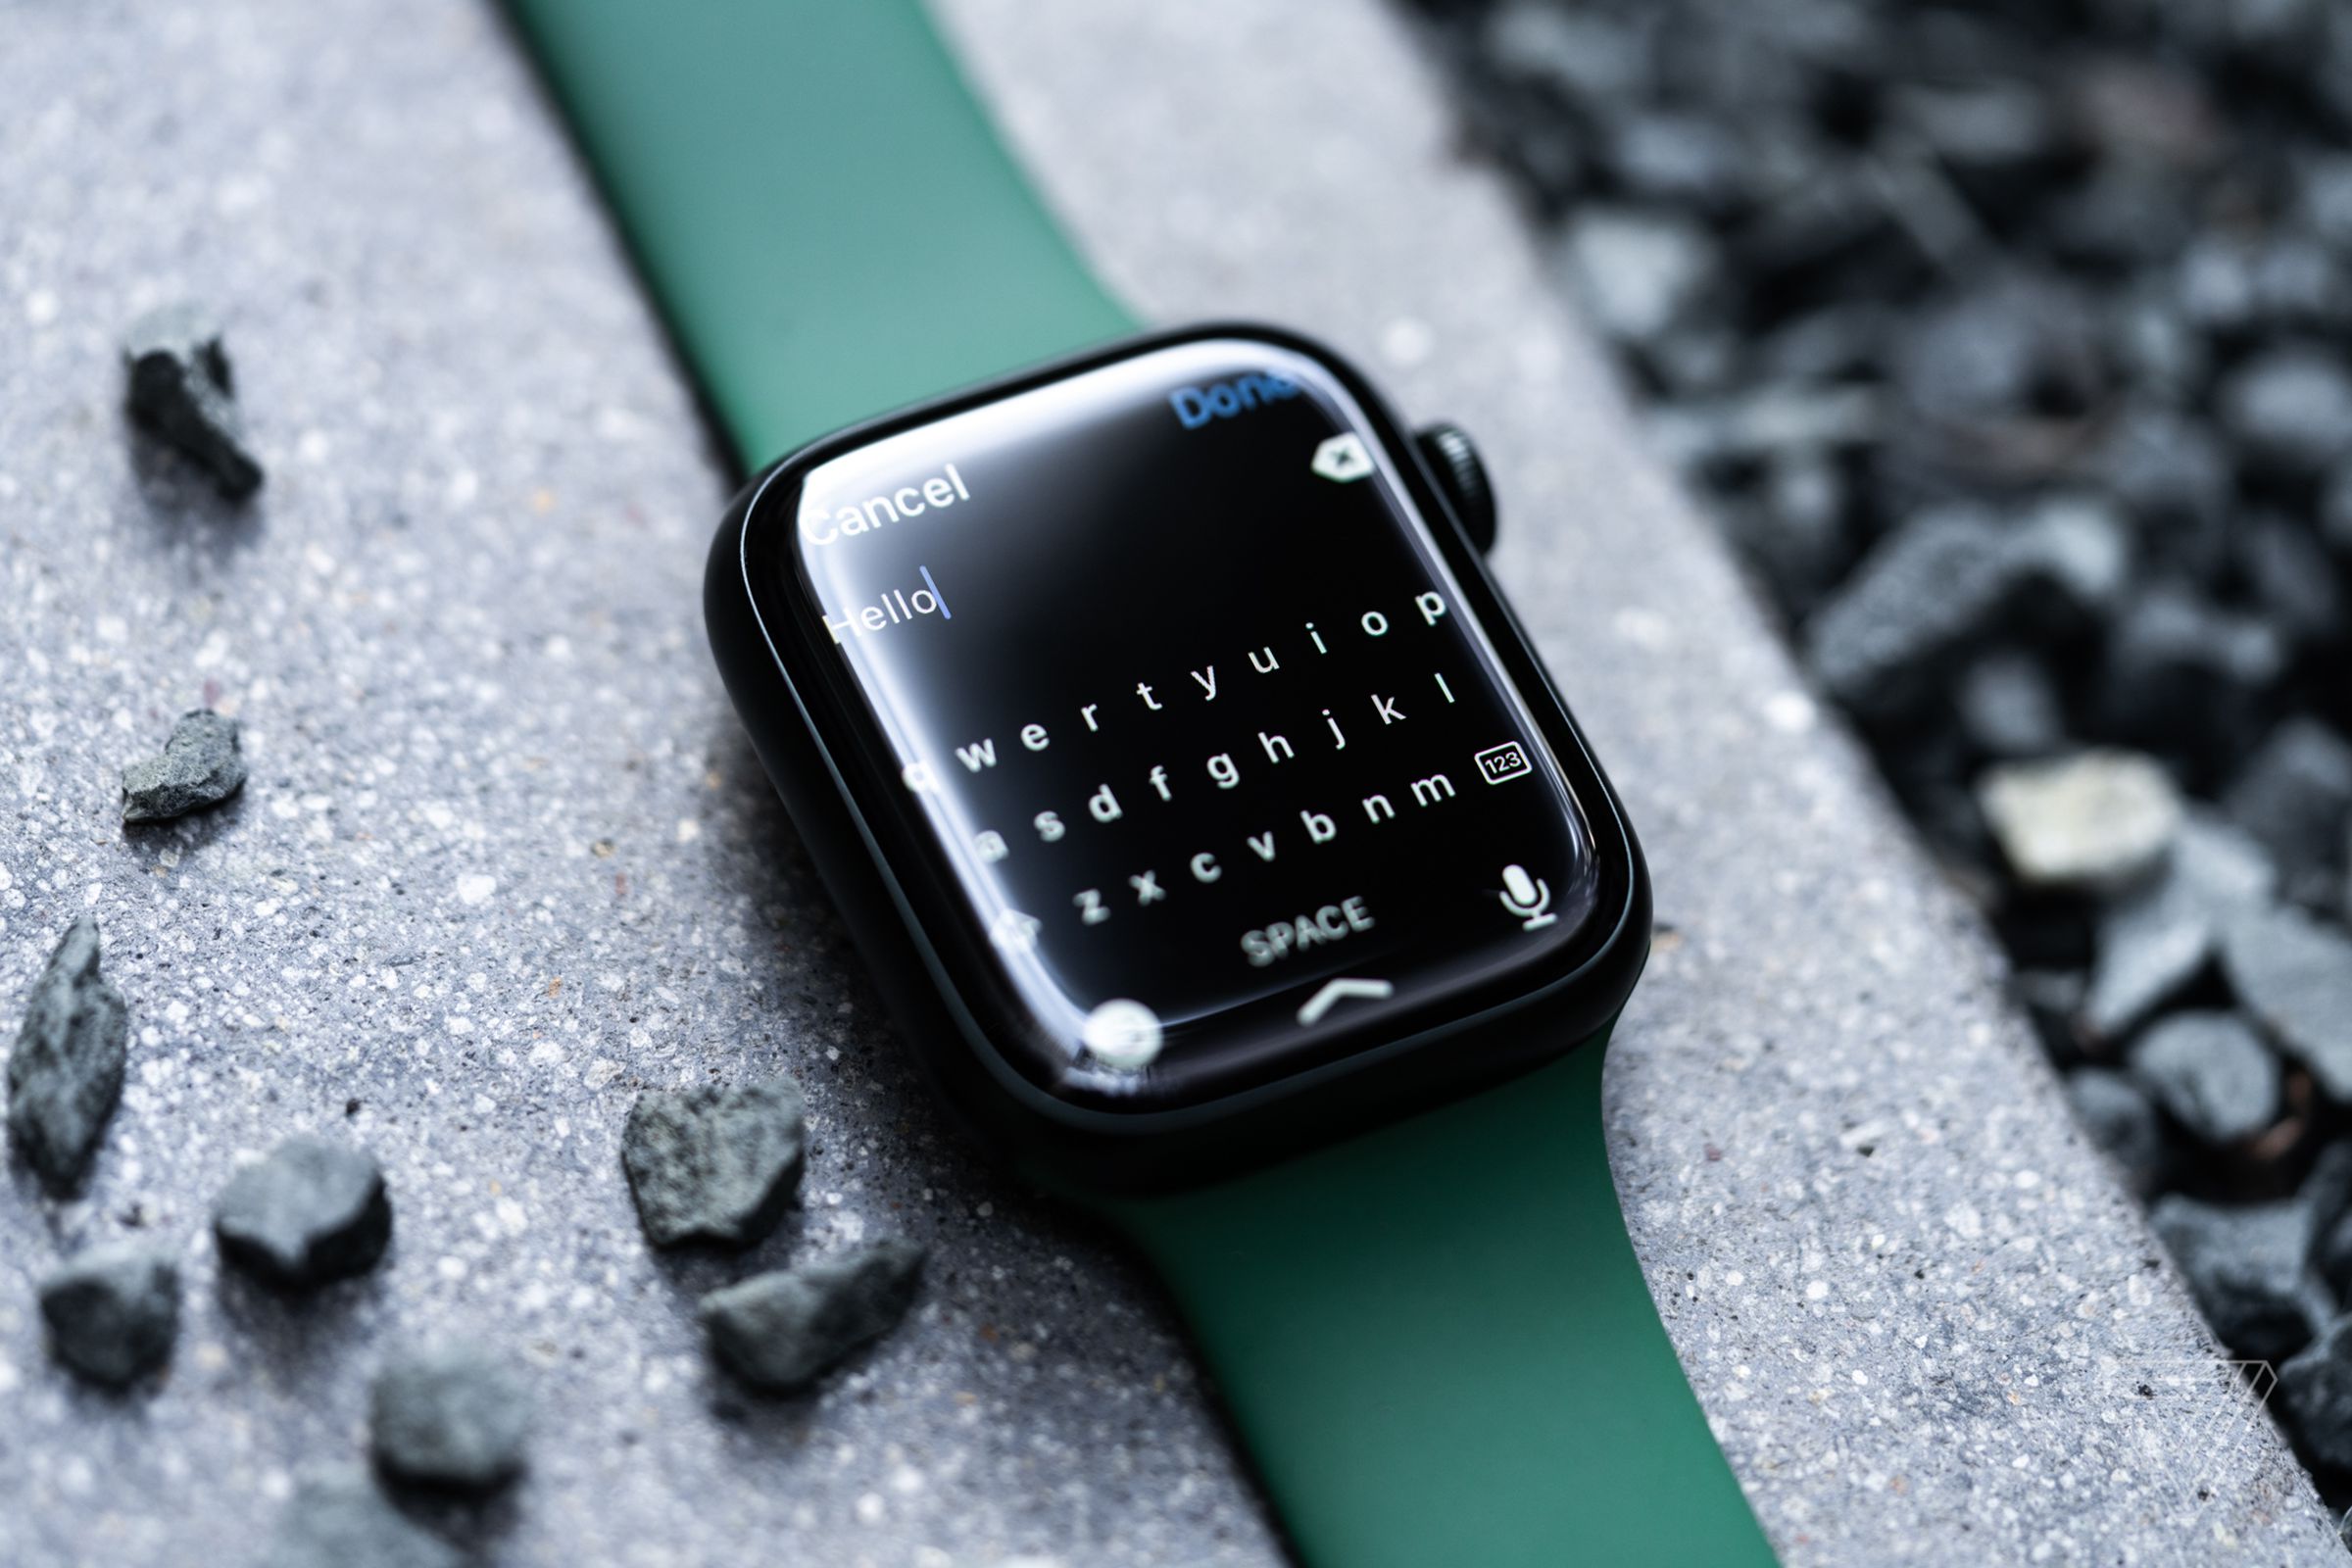 An Apple Watch on a stone surface, with a keyboard typing the word “hello.”